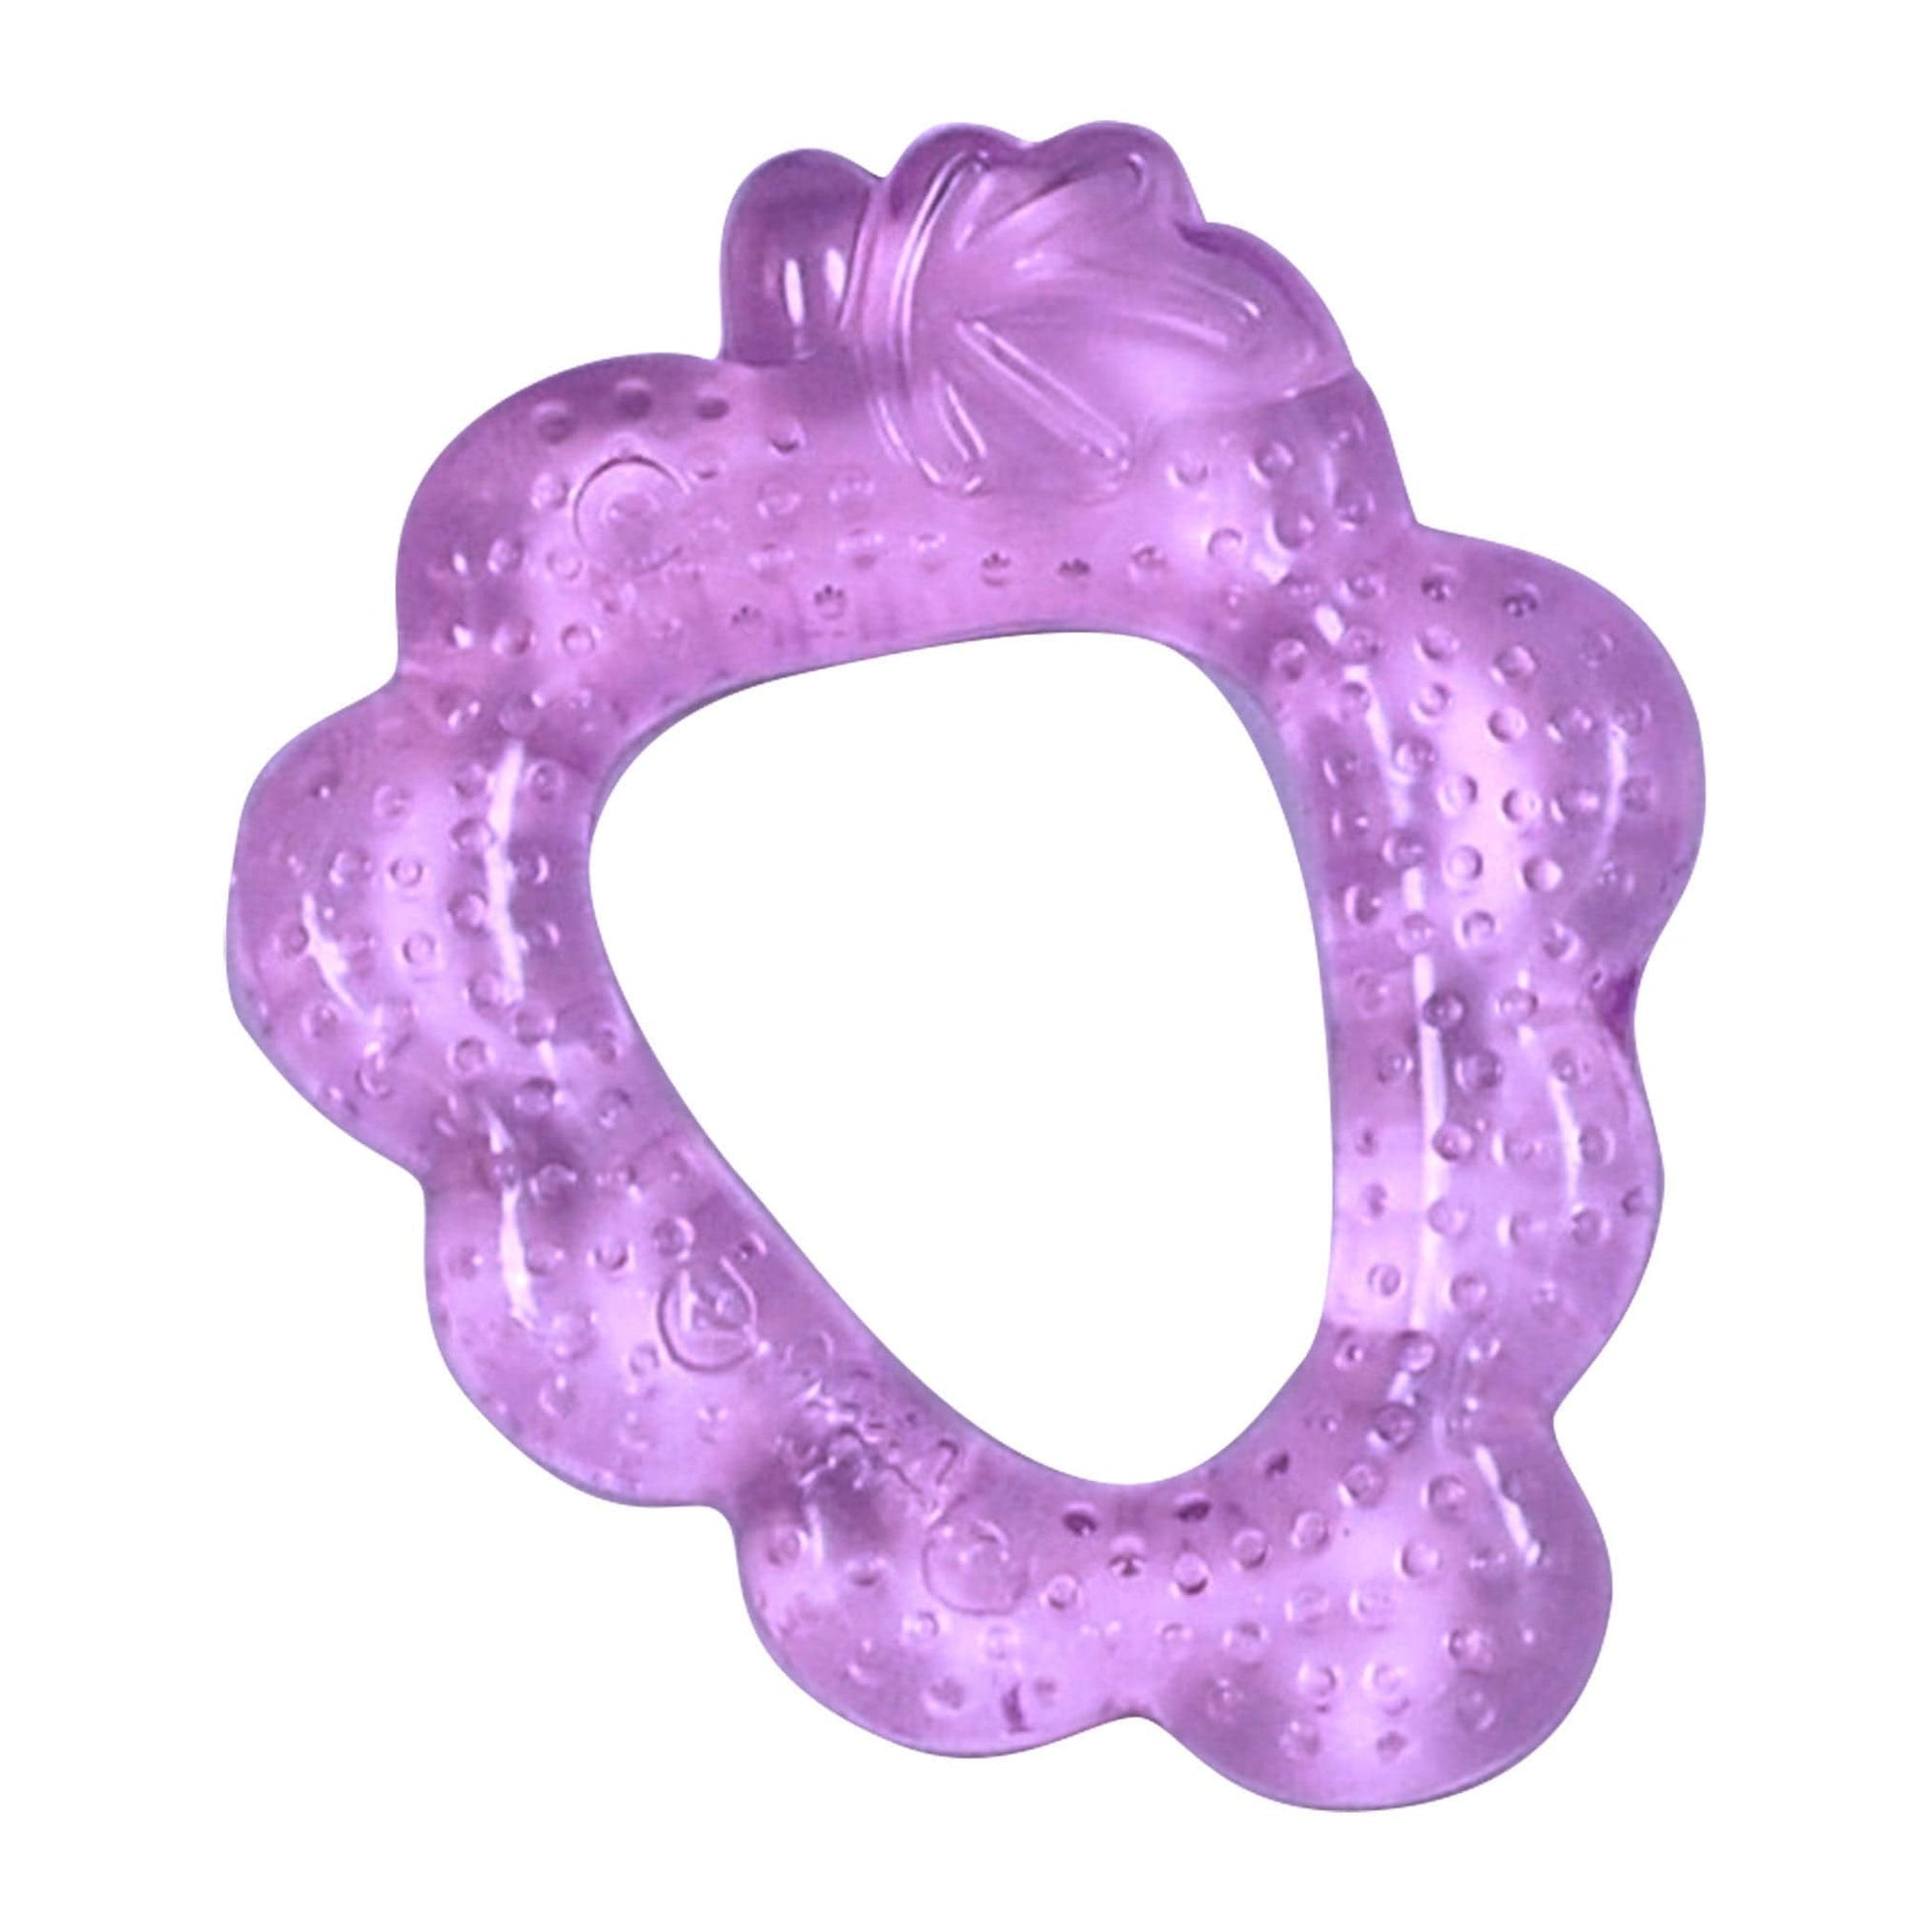 Green Sprouts teether Green Sprouts Cooling Teether - Grapes